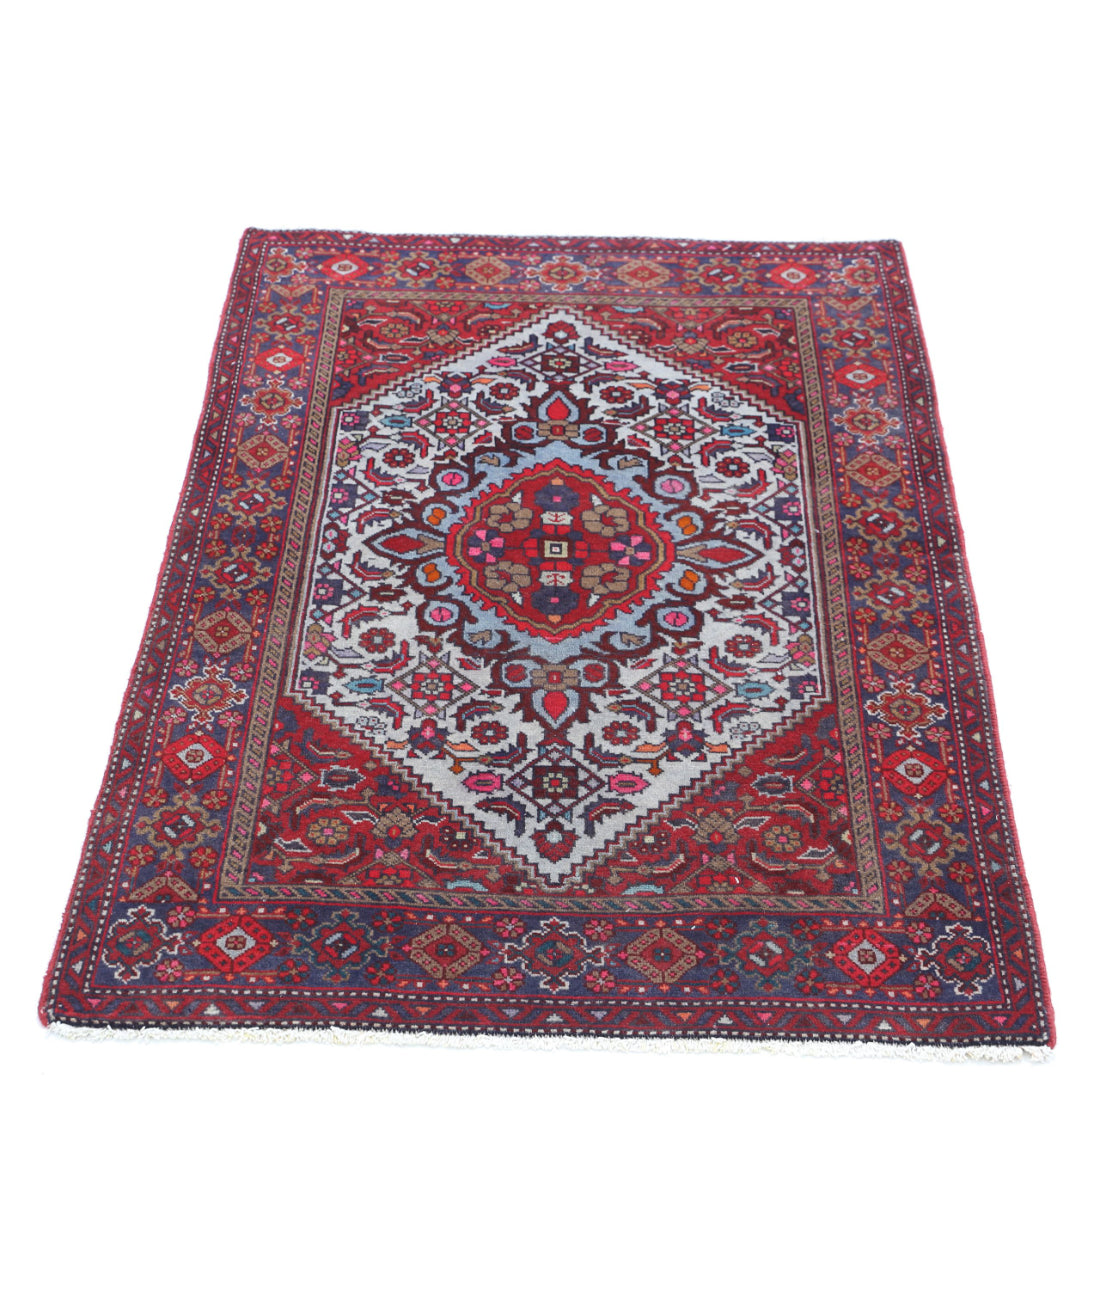 Hand Knotted Persian Tabriz Wool Rug - 2'7'' x 4'1'' 2'7'' x 4'1'' (78 X 123) / Red / Blue